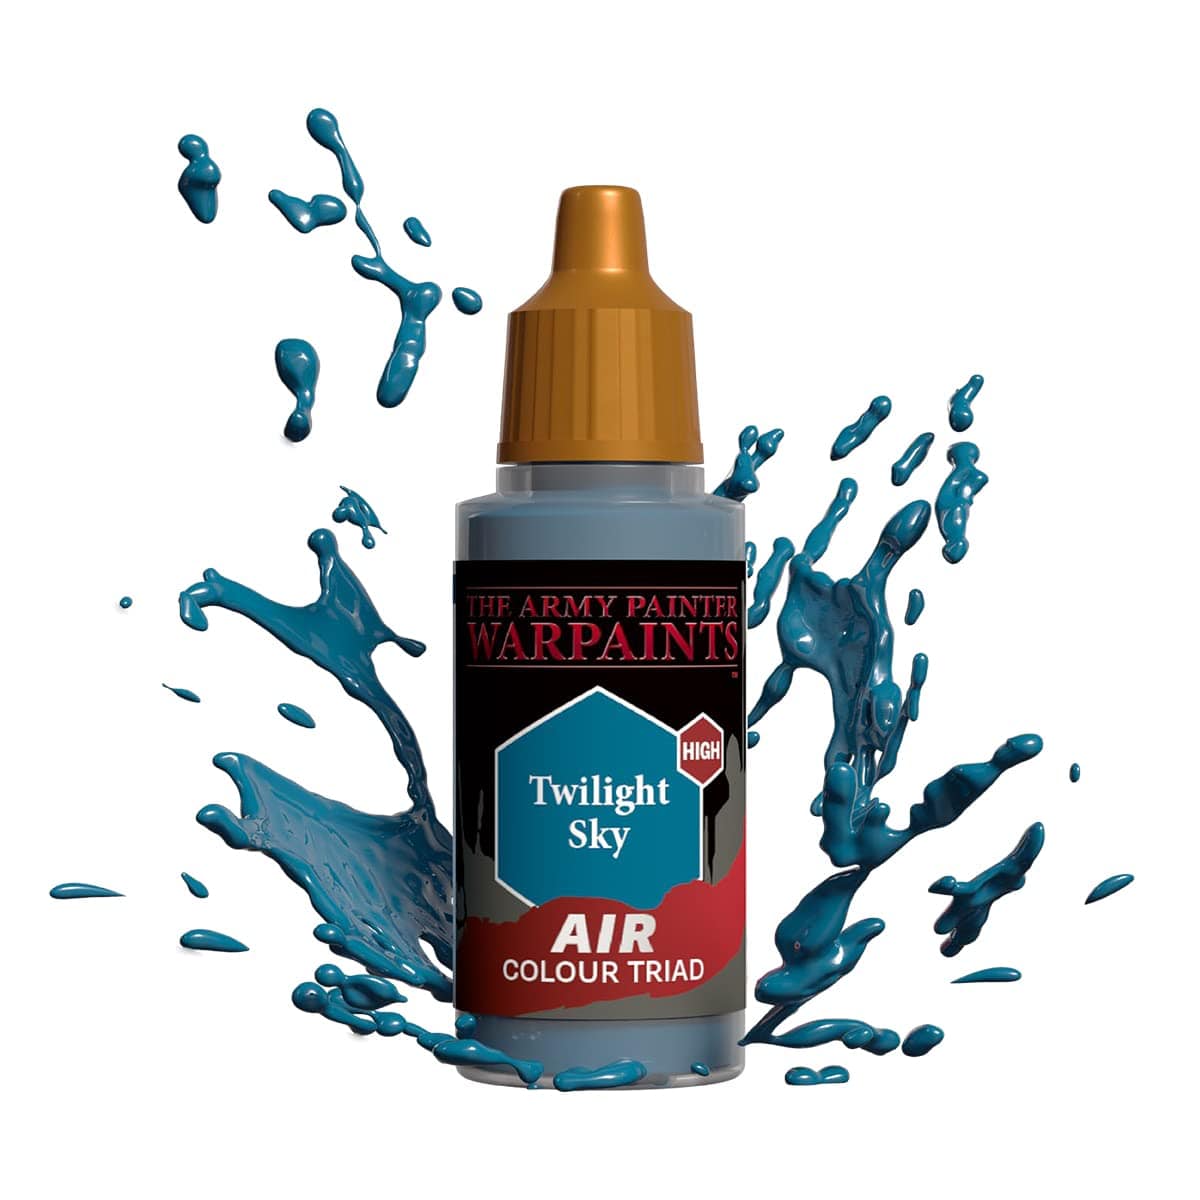 The Army Painter Warpaints Air: Twilight Sky 18ml - Lost City Toys